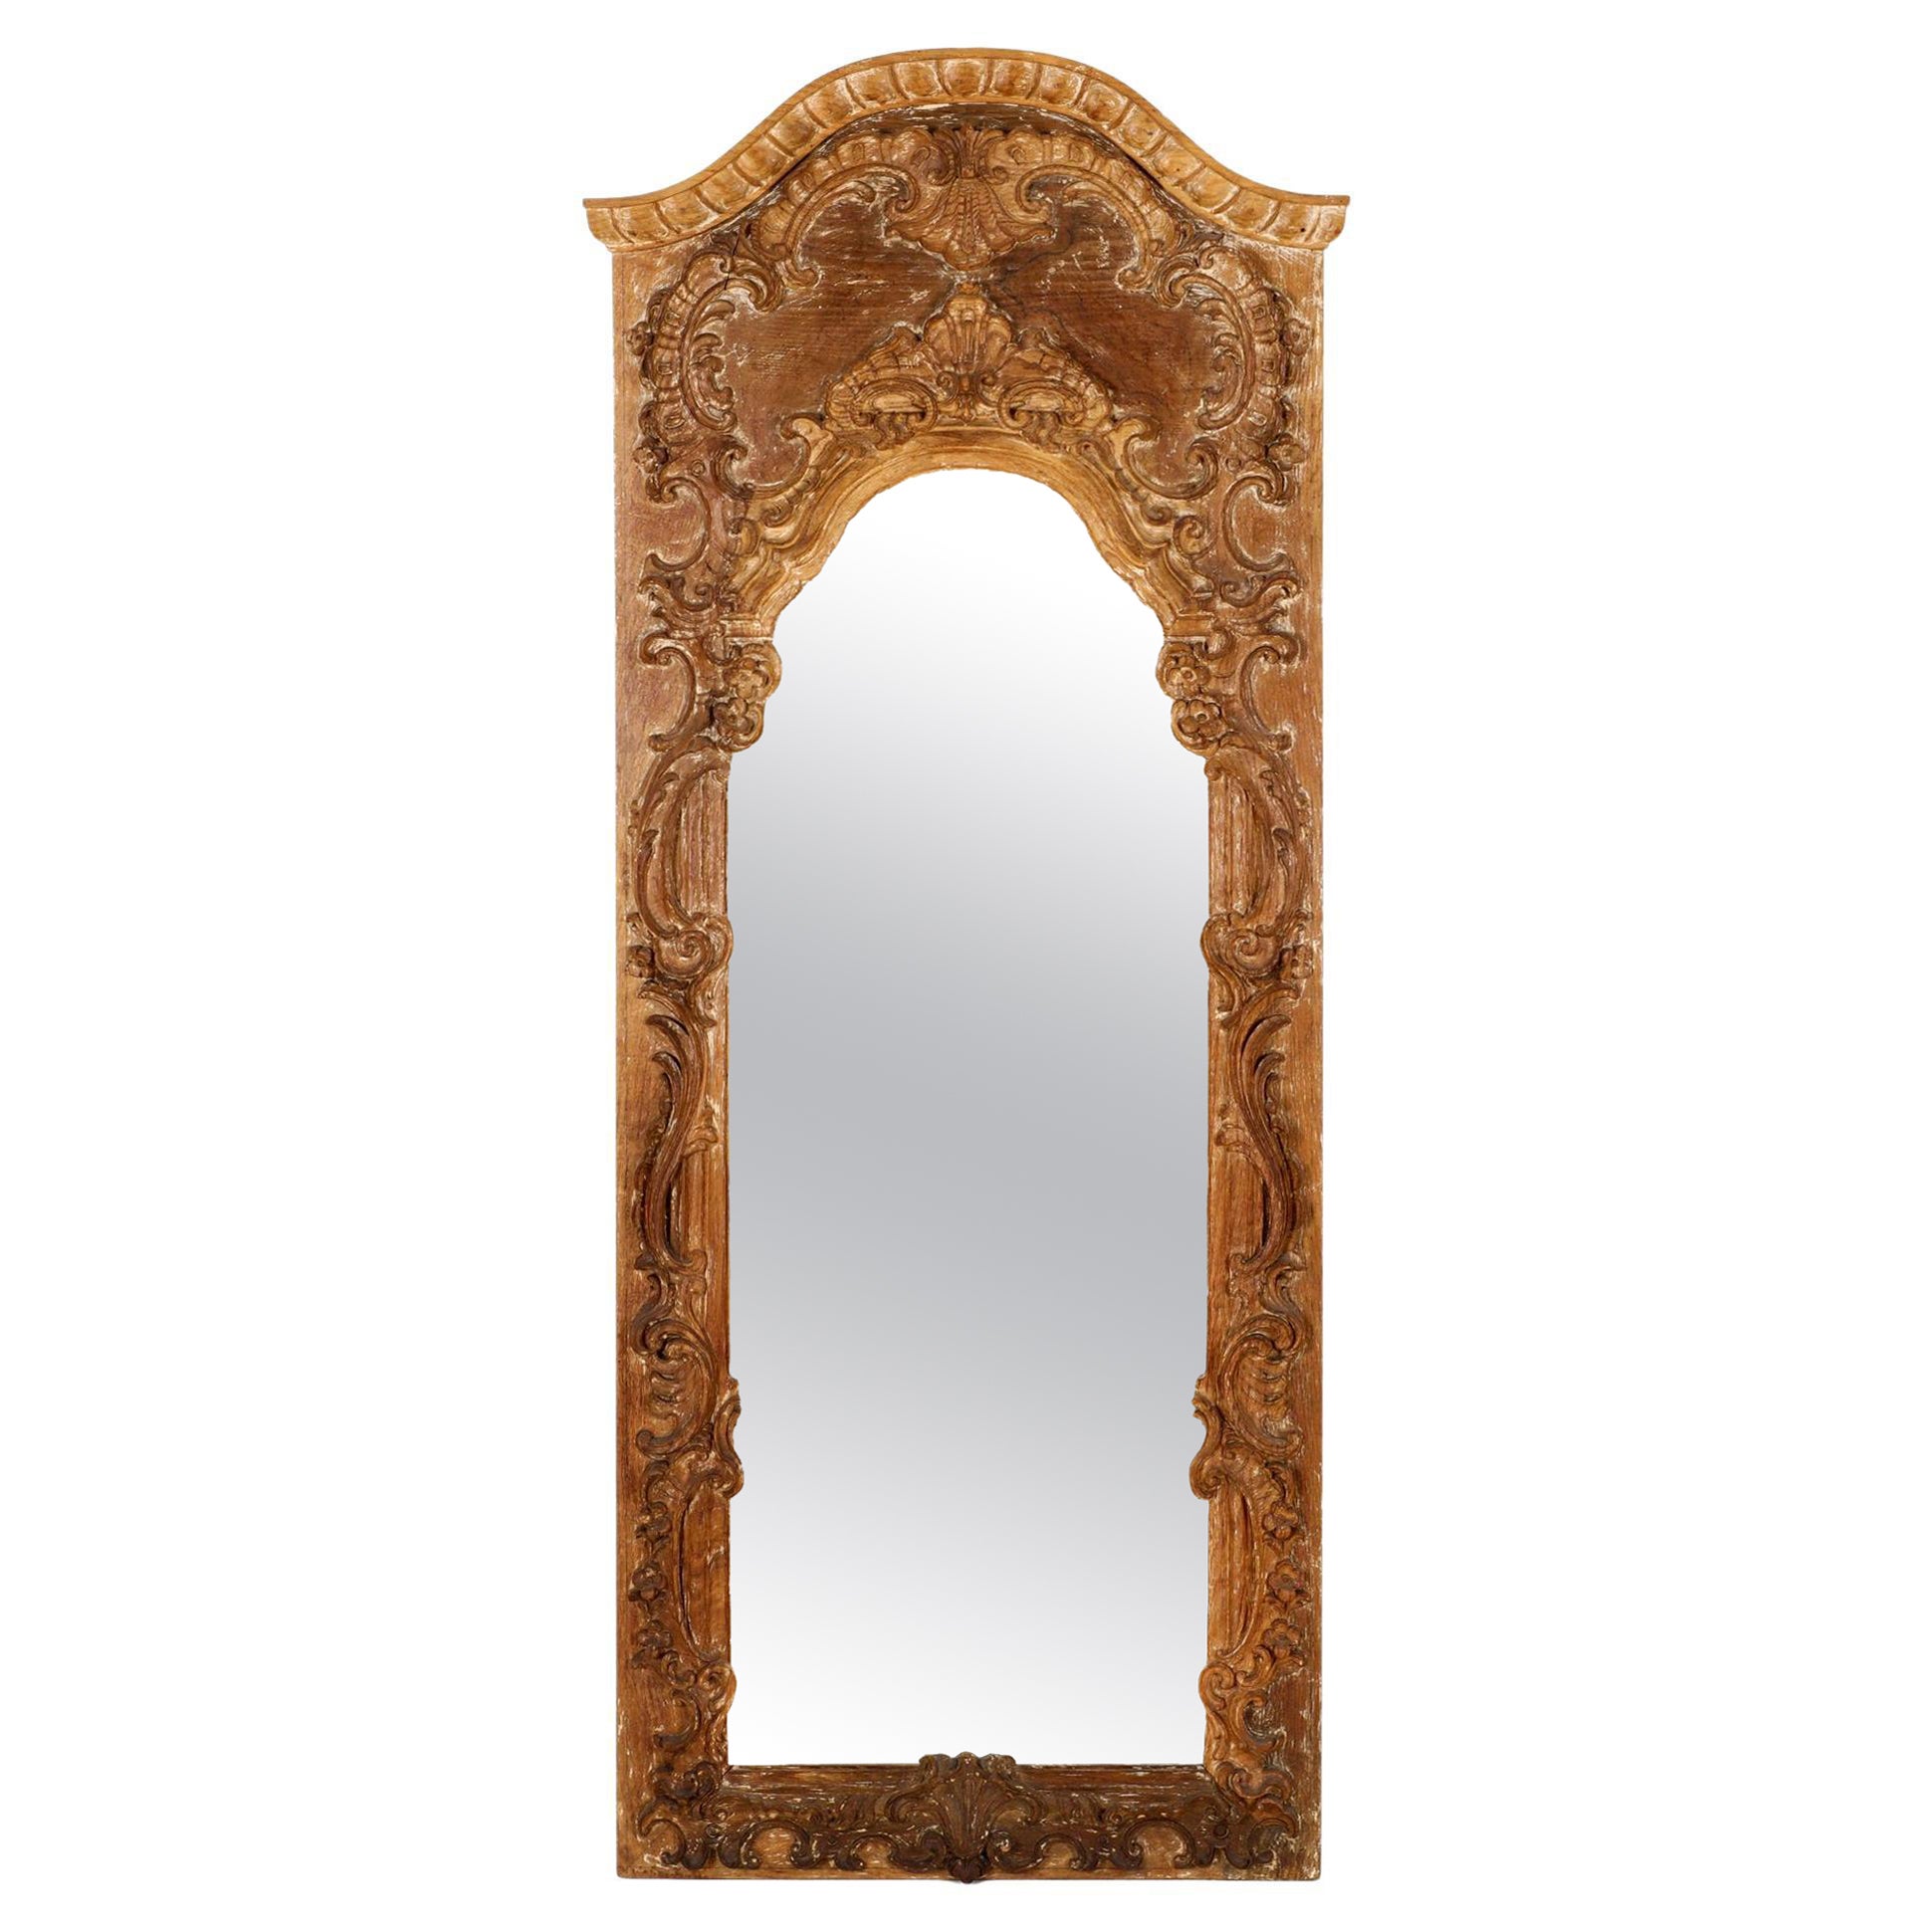 Dom Joao V mirror, carved chestnut wood Portugal 18th Century For Sale